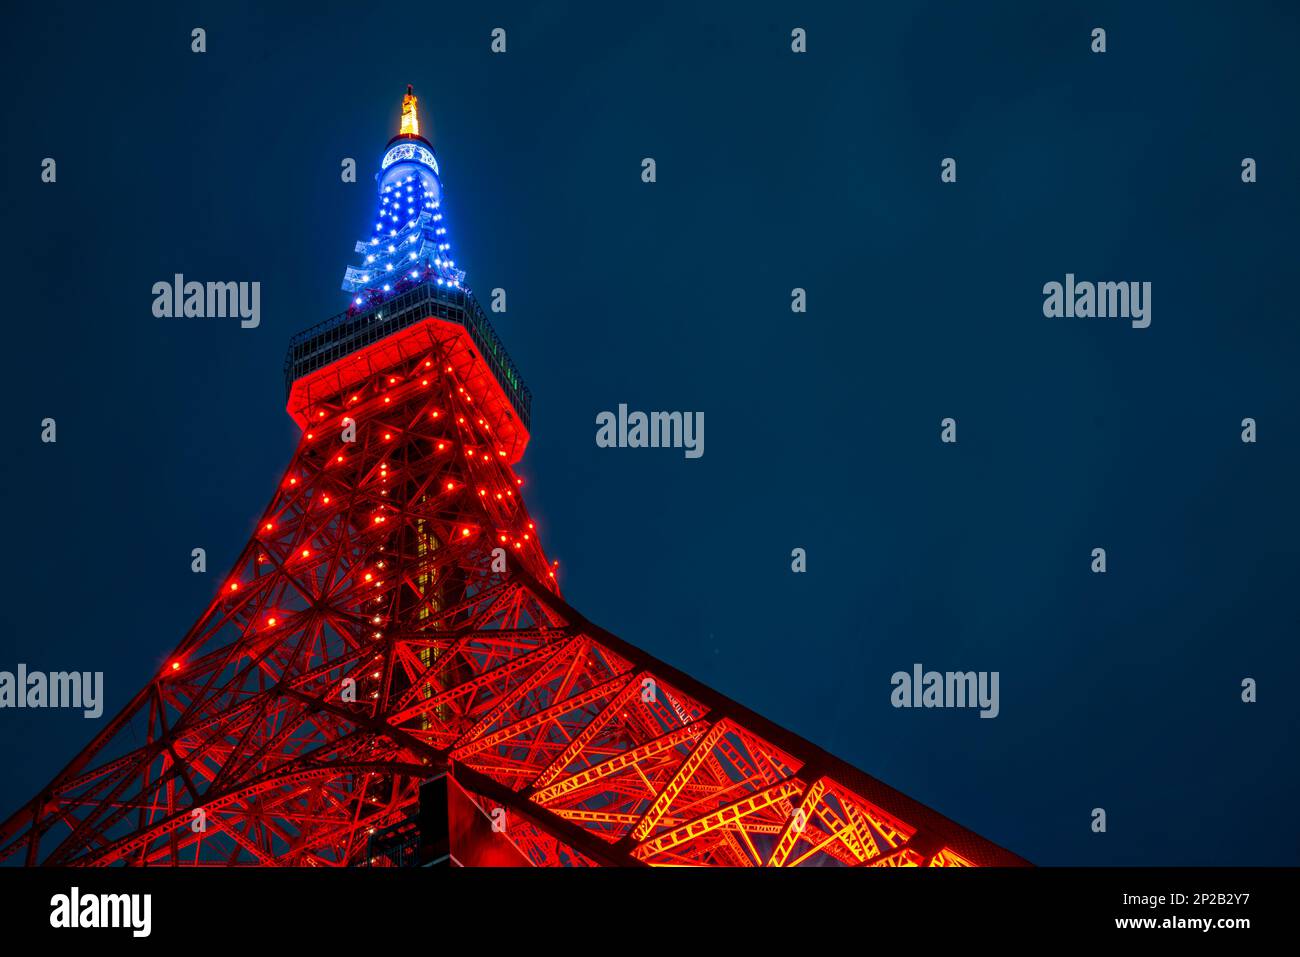 Tokyo Tower, an iconic landmark of Japan, stands tall in the heart of Tokyo, illuminating the city skyline with its striking red and white steel struc Stock Photo